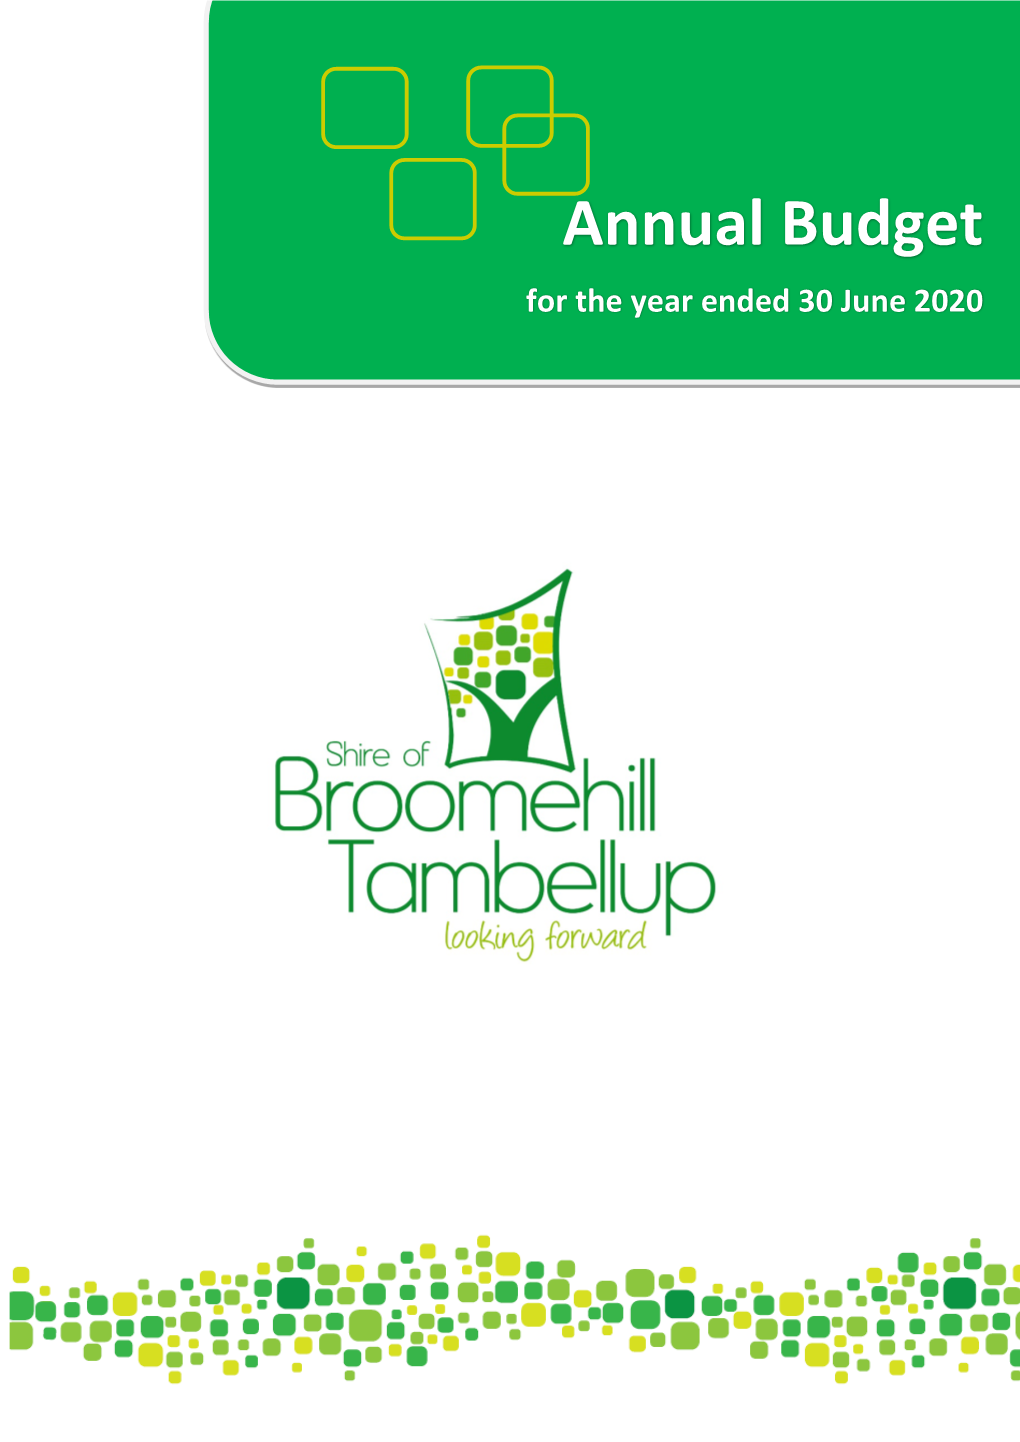 Annual Budget for the Year Ended 30 June 2020